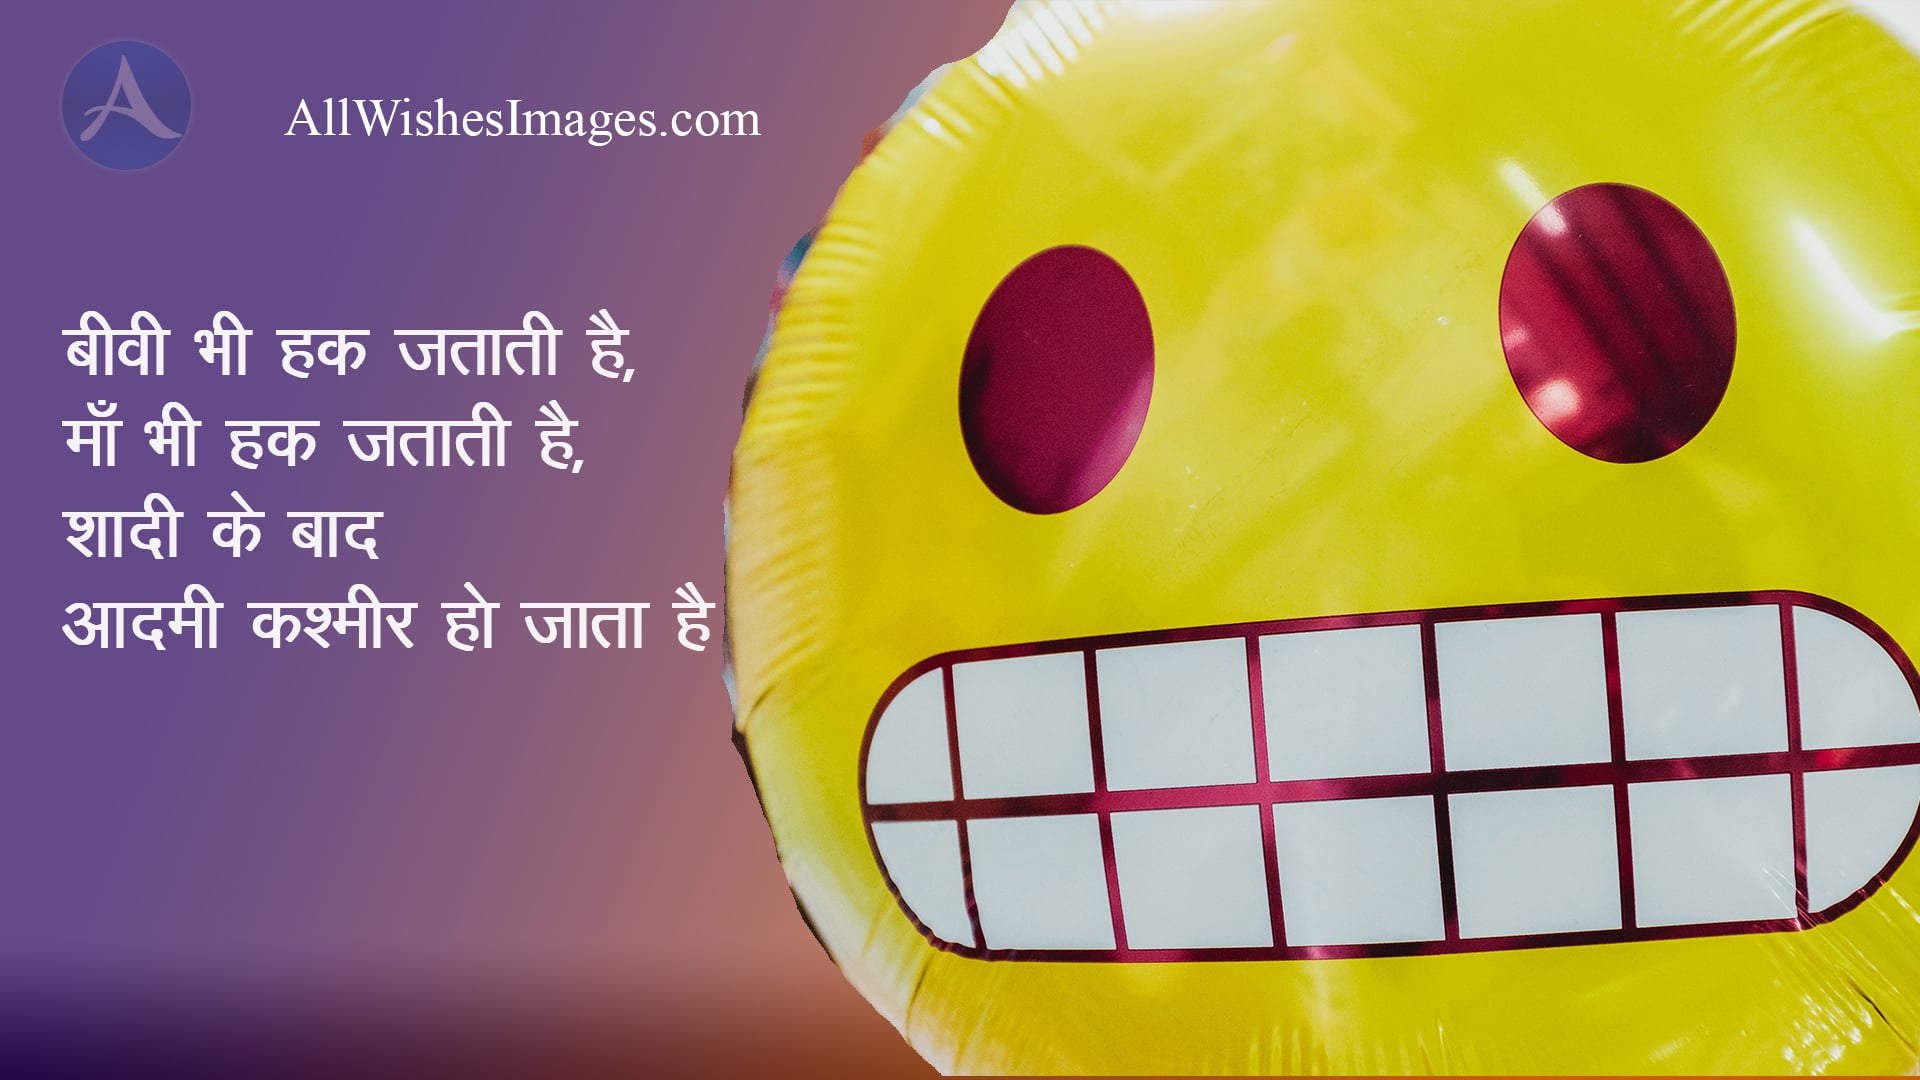 Funny Dosti Shayaris - All Wishes Images - Images for WhatsApp